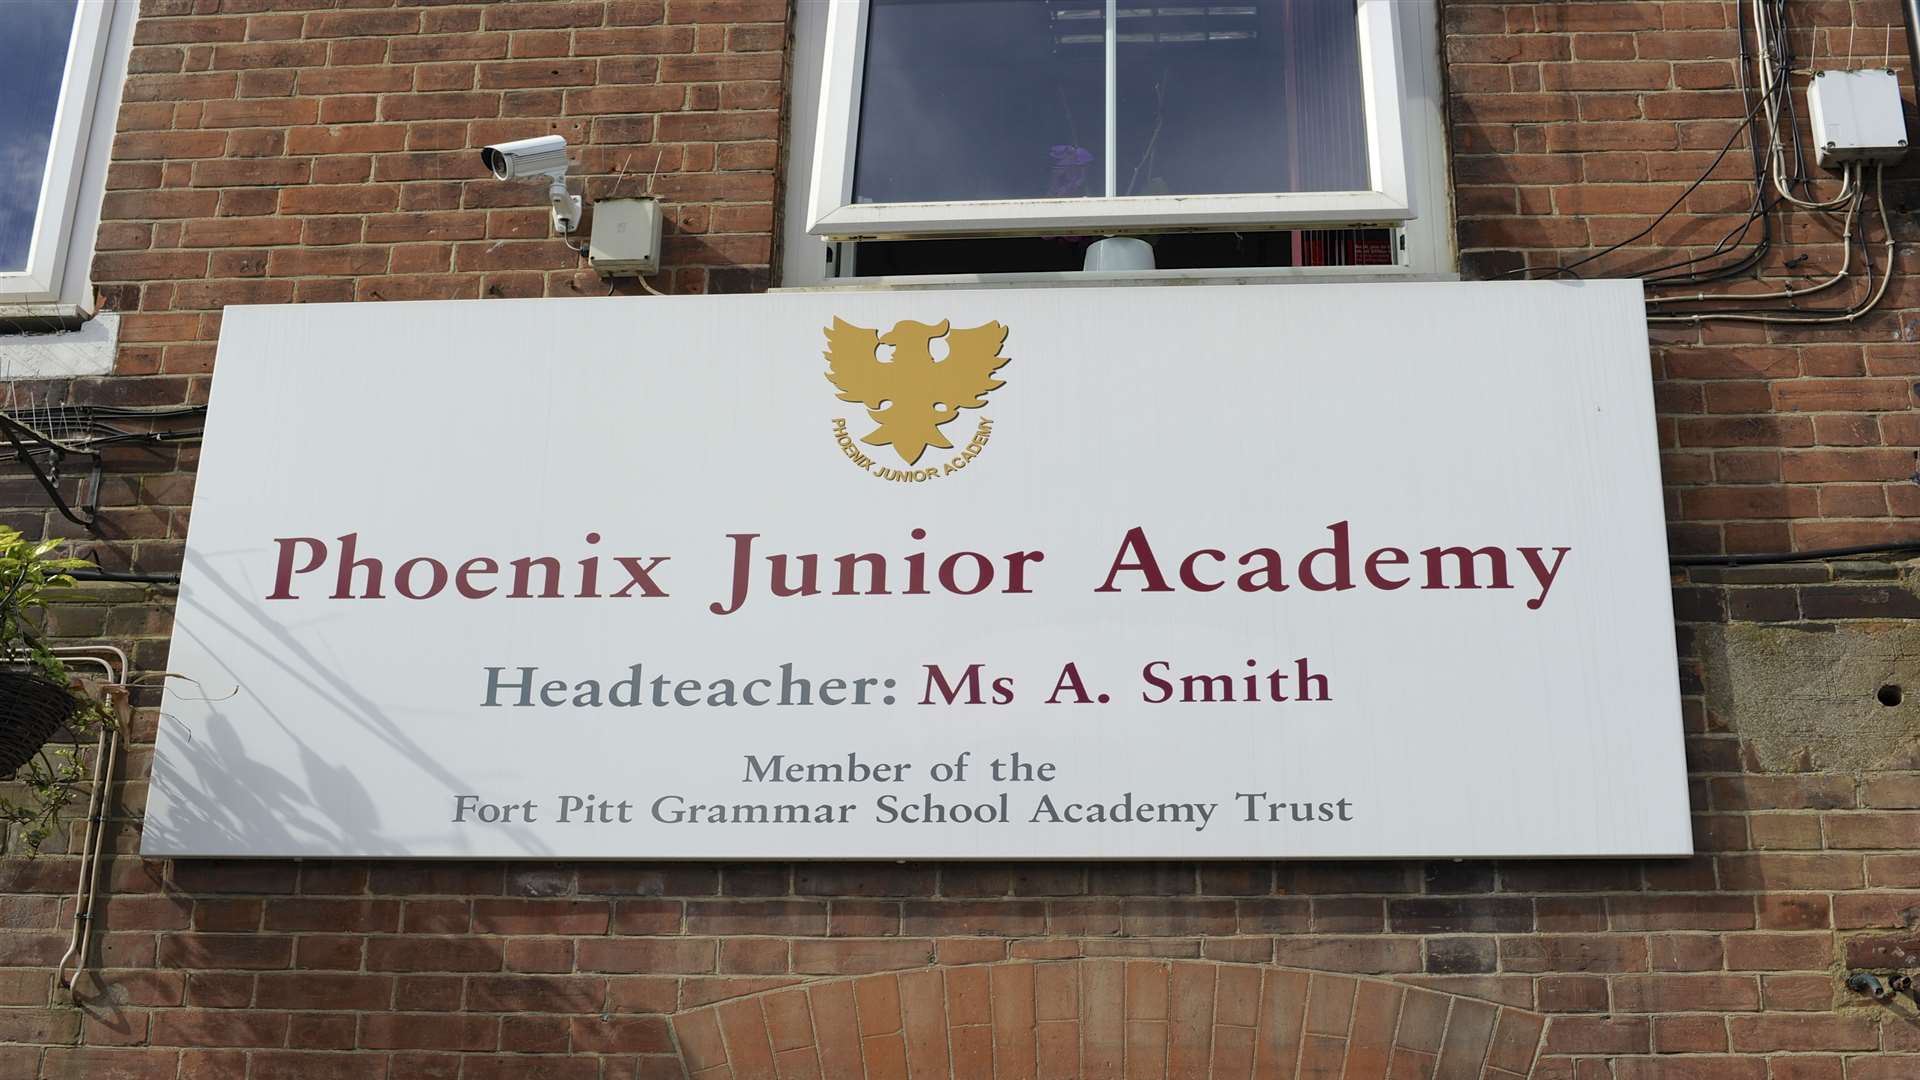 The exams were scrapped at Phoenix Junior Academy